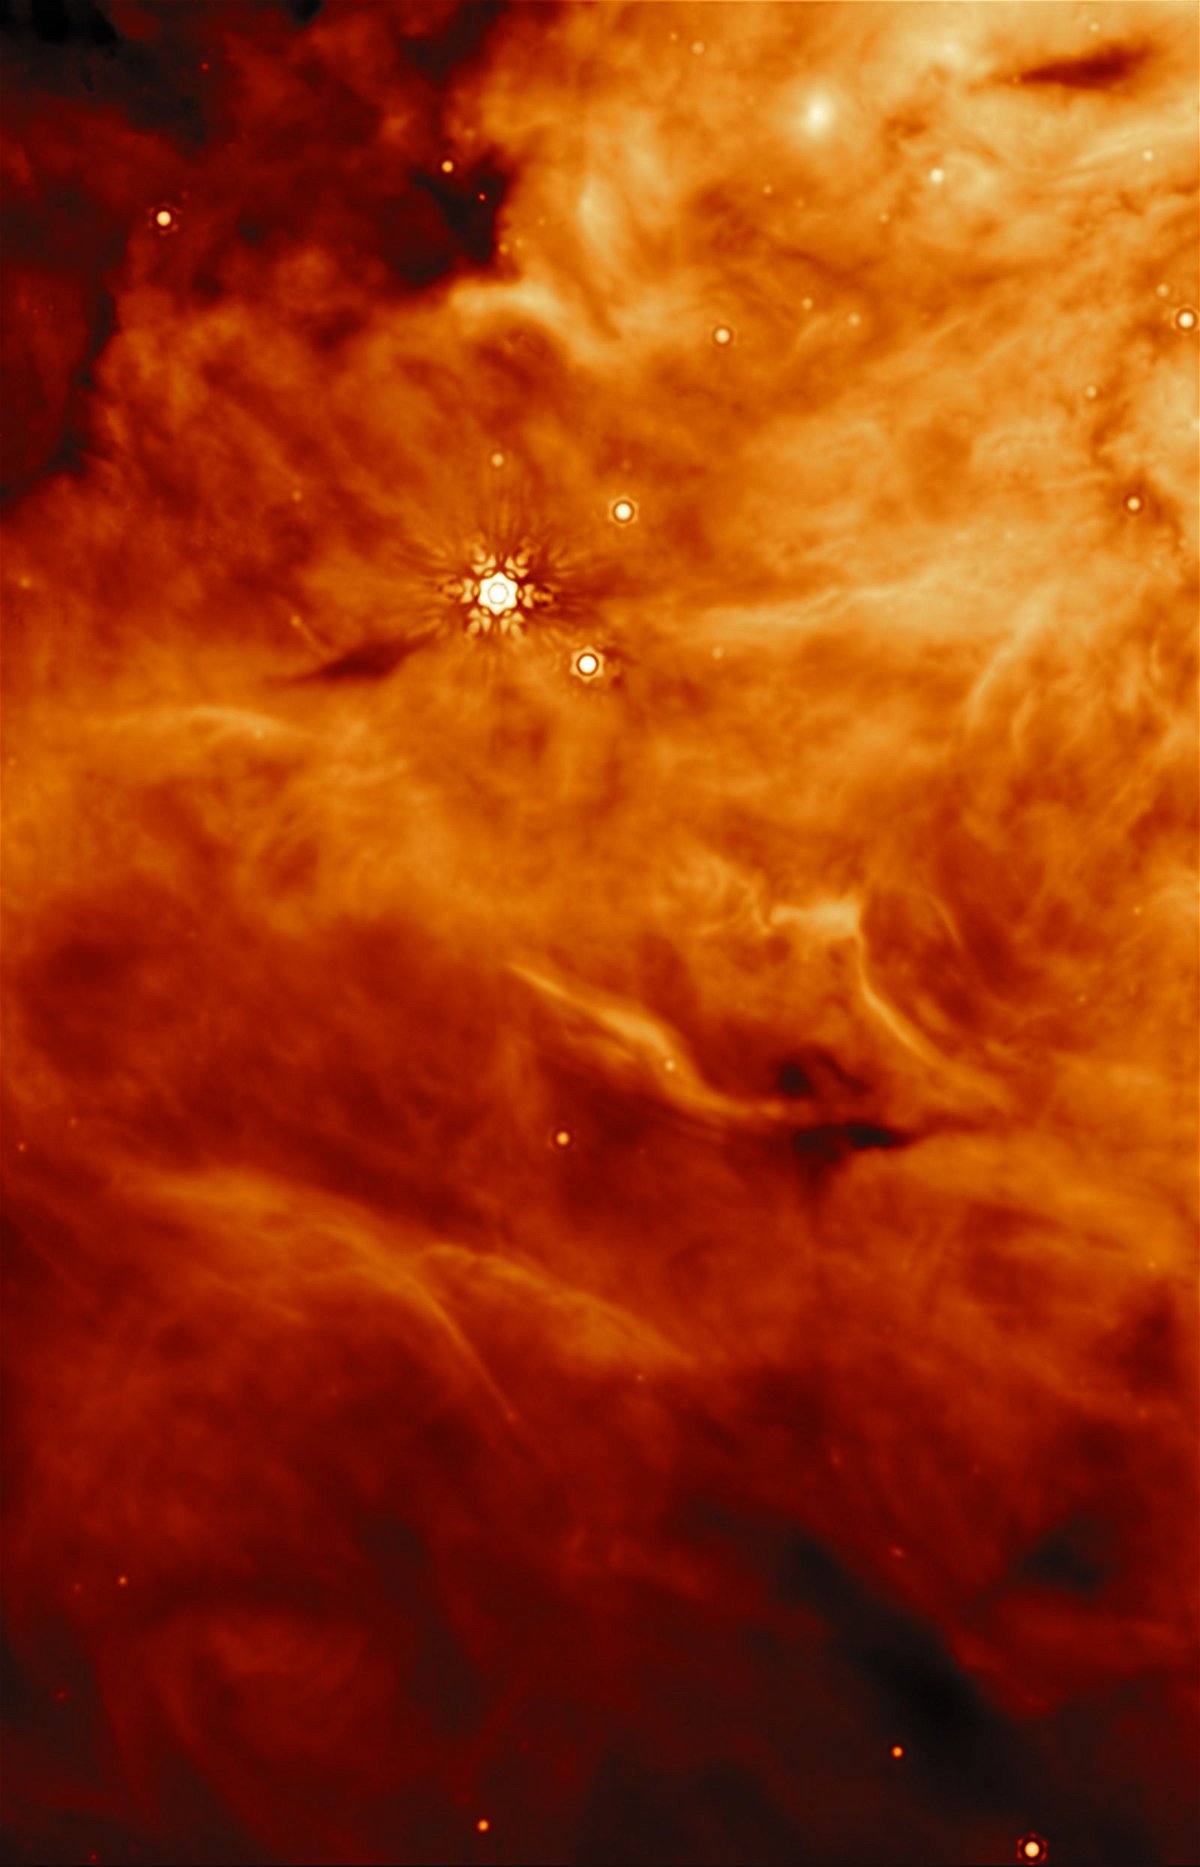 The James Webb Space Telescope's Mid-Infrared Instrument captured an image of a region parallel to the massive protostar known as IRAS 23385. The protostar is not visible in this image.